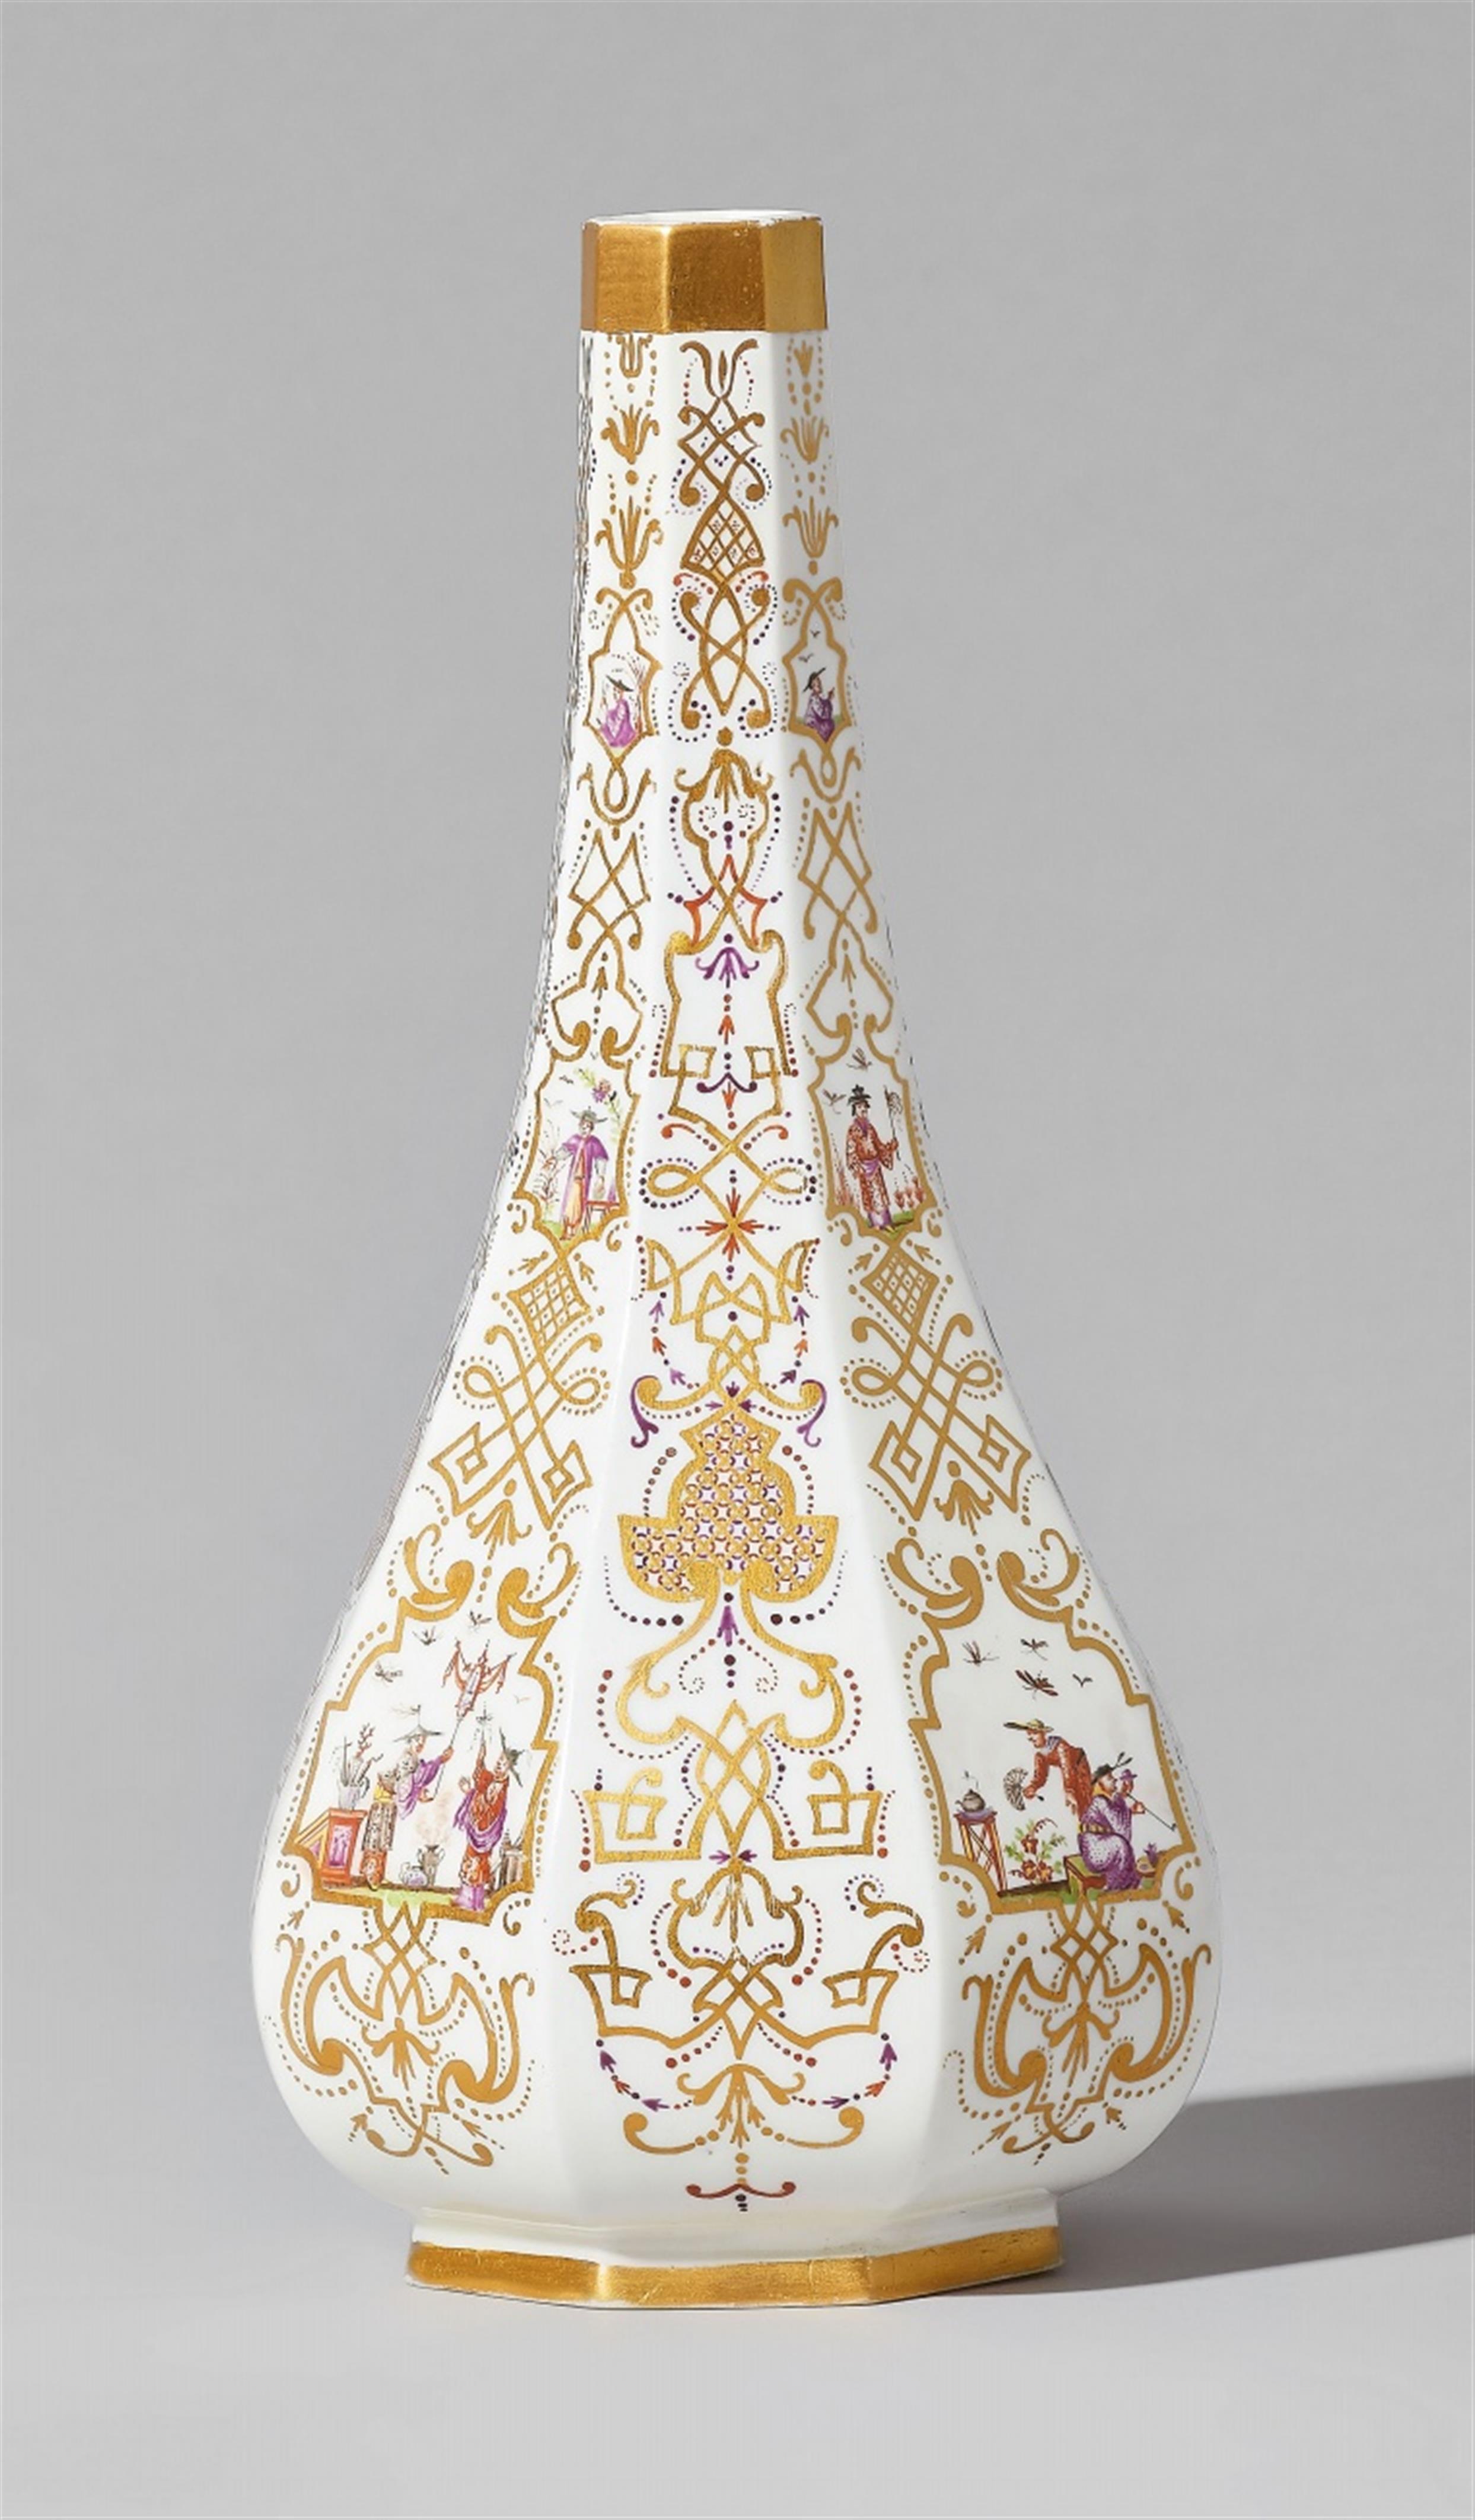 A rare and finely decorated Meissen porcelain sake bottle - image-1